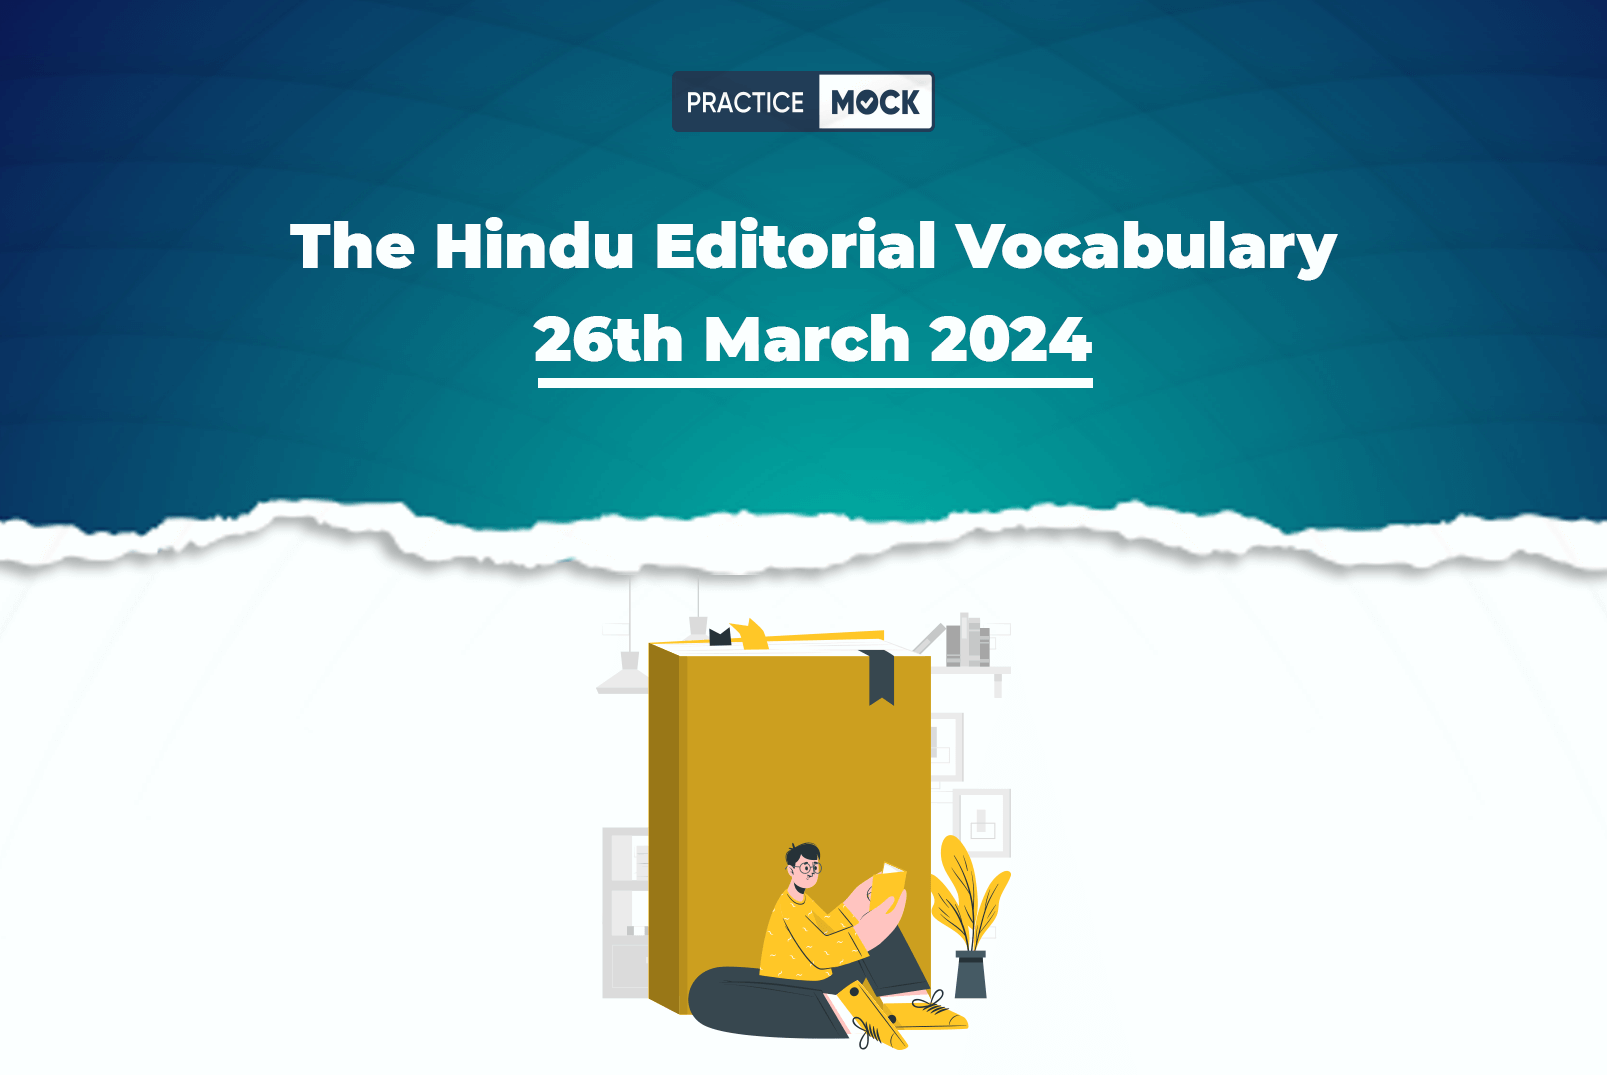 The Hindu Editorial Vocabulary 26th March 2024